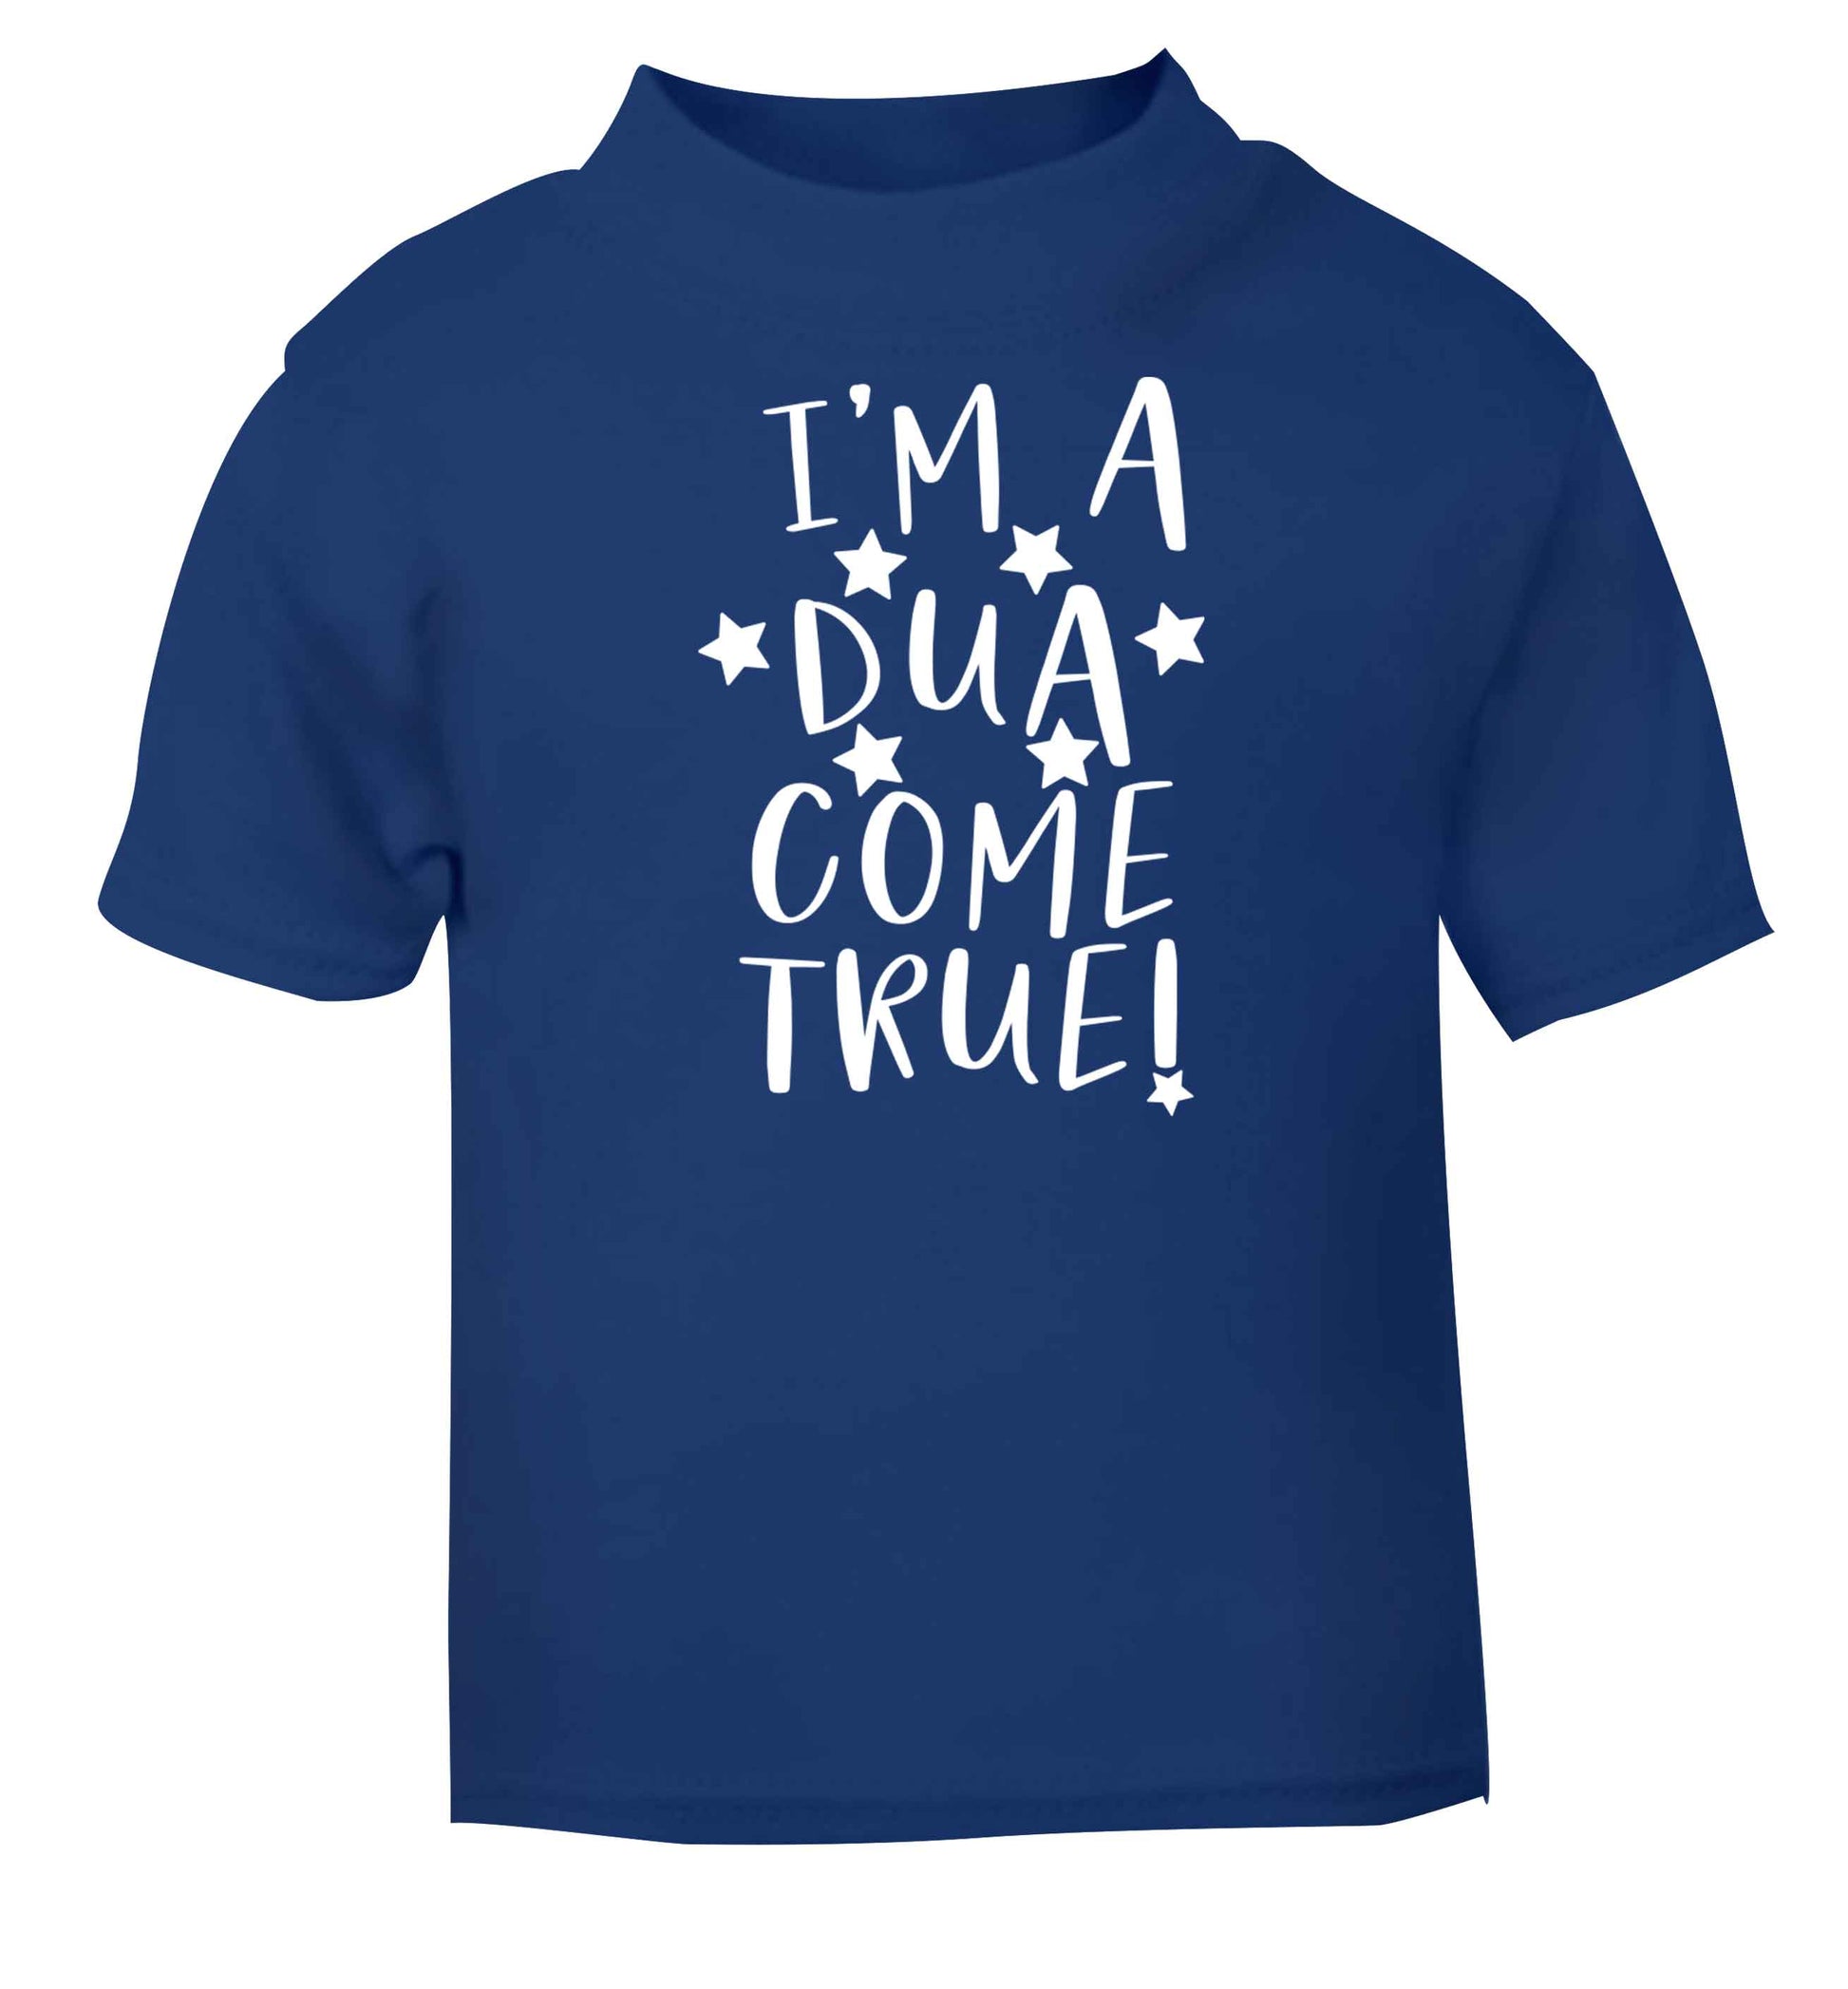 I'm a dua come true blue baby toddler Tshirt 2 Years